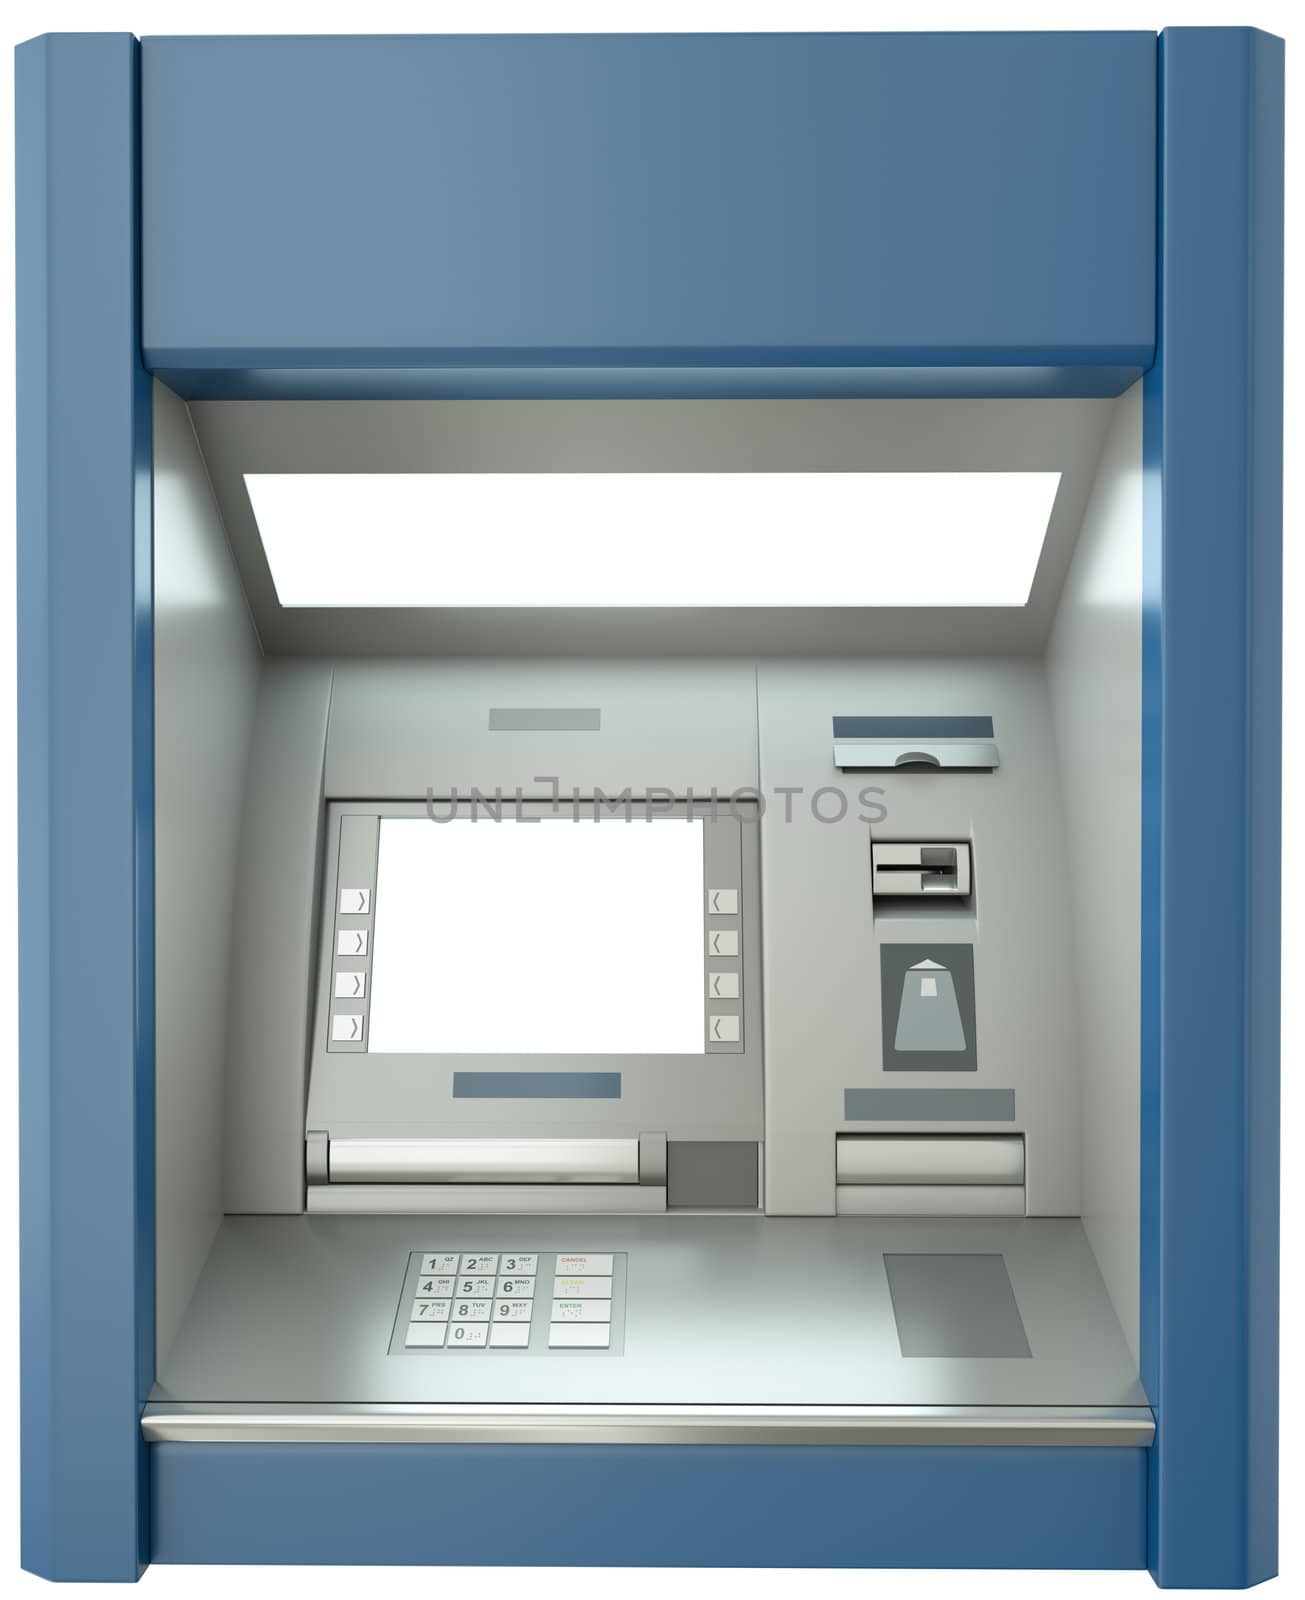 ATM machine with blank screen. 3D render.